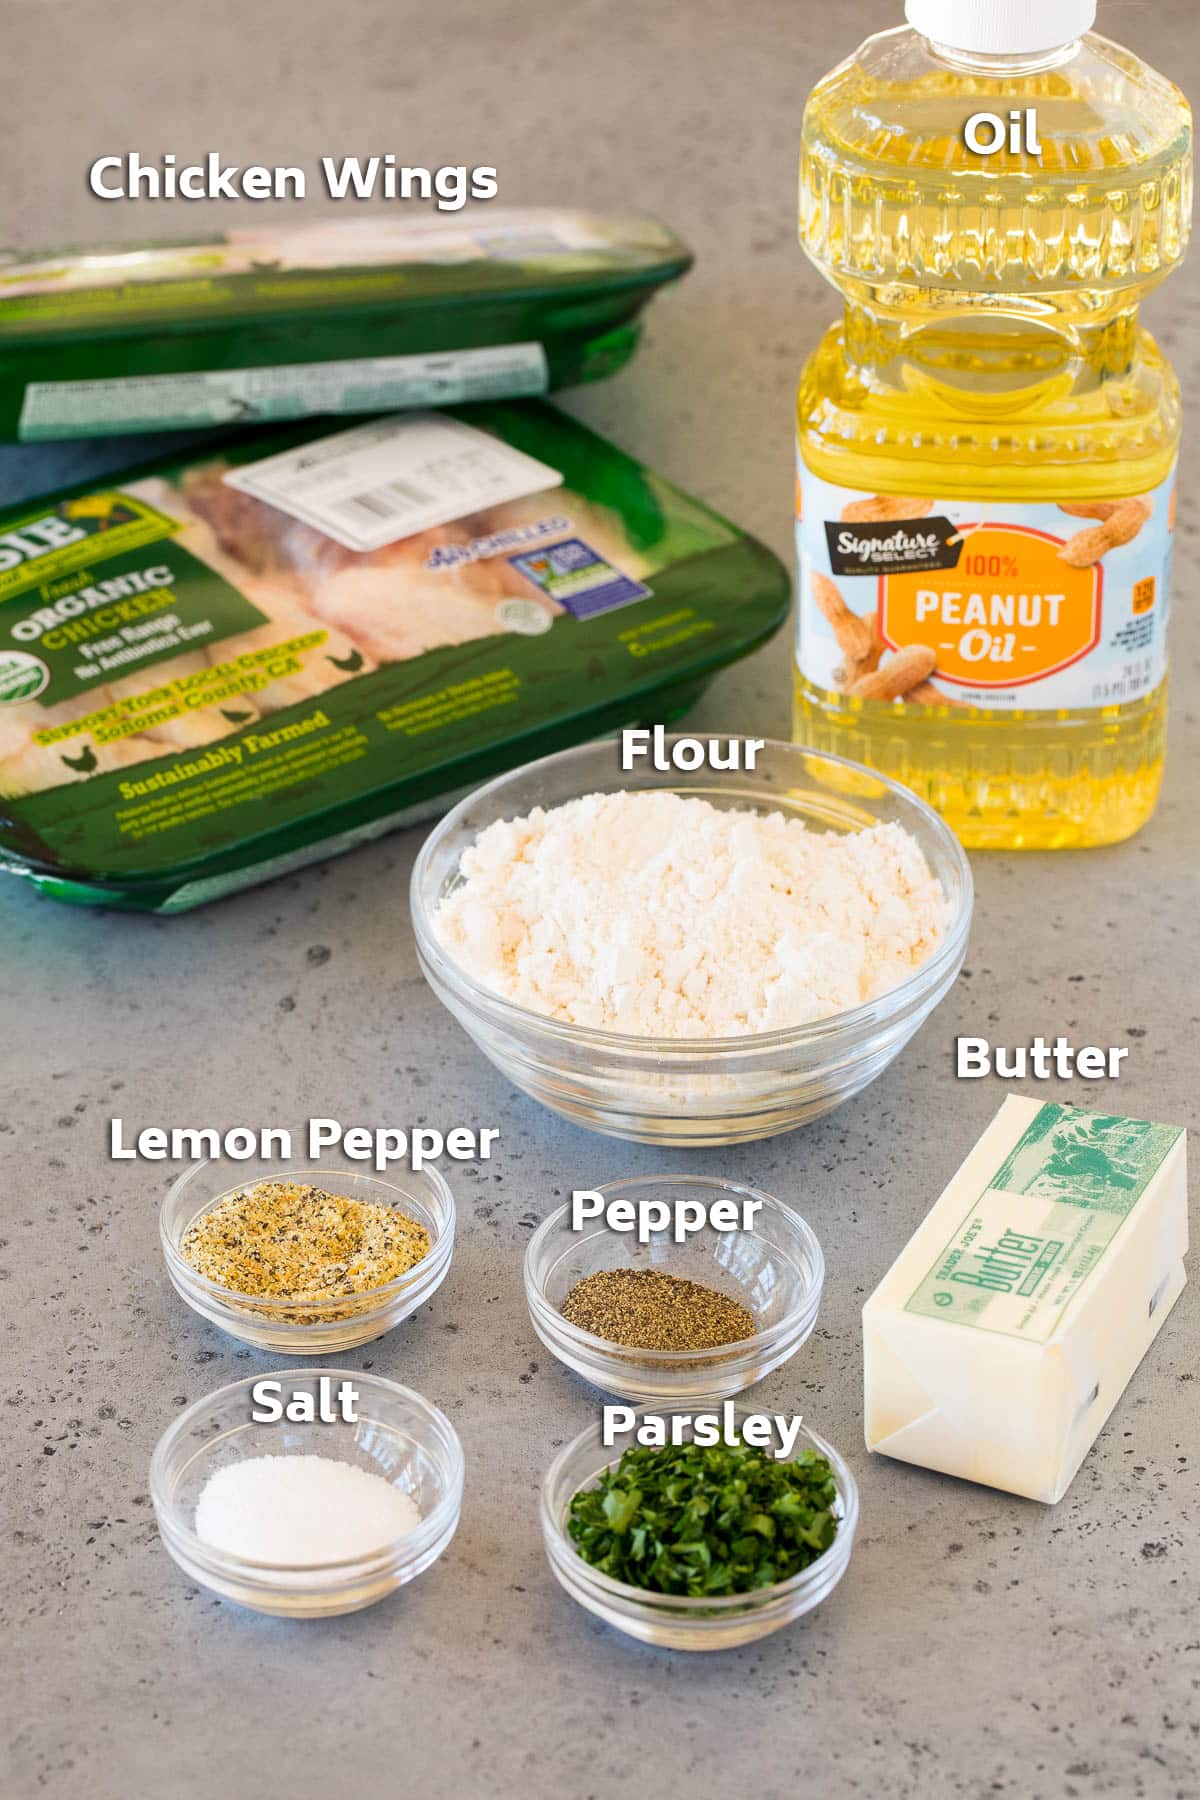 Ingredients including chicken wings, butter, flour and seasonings.